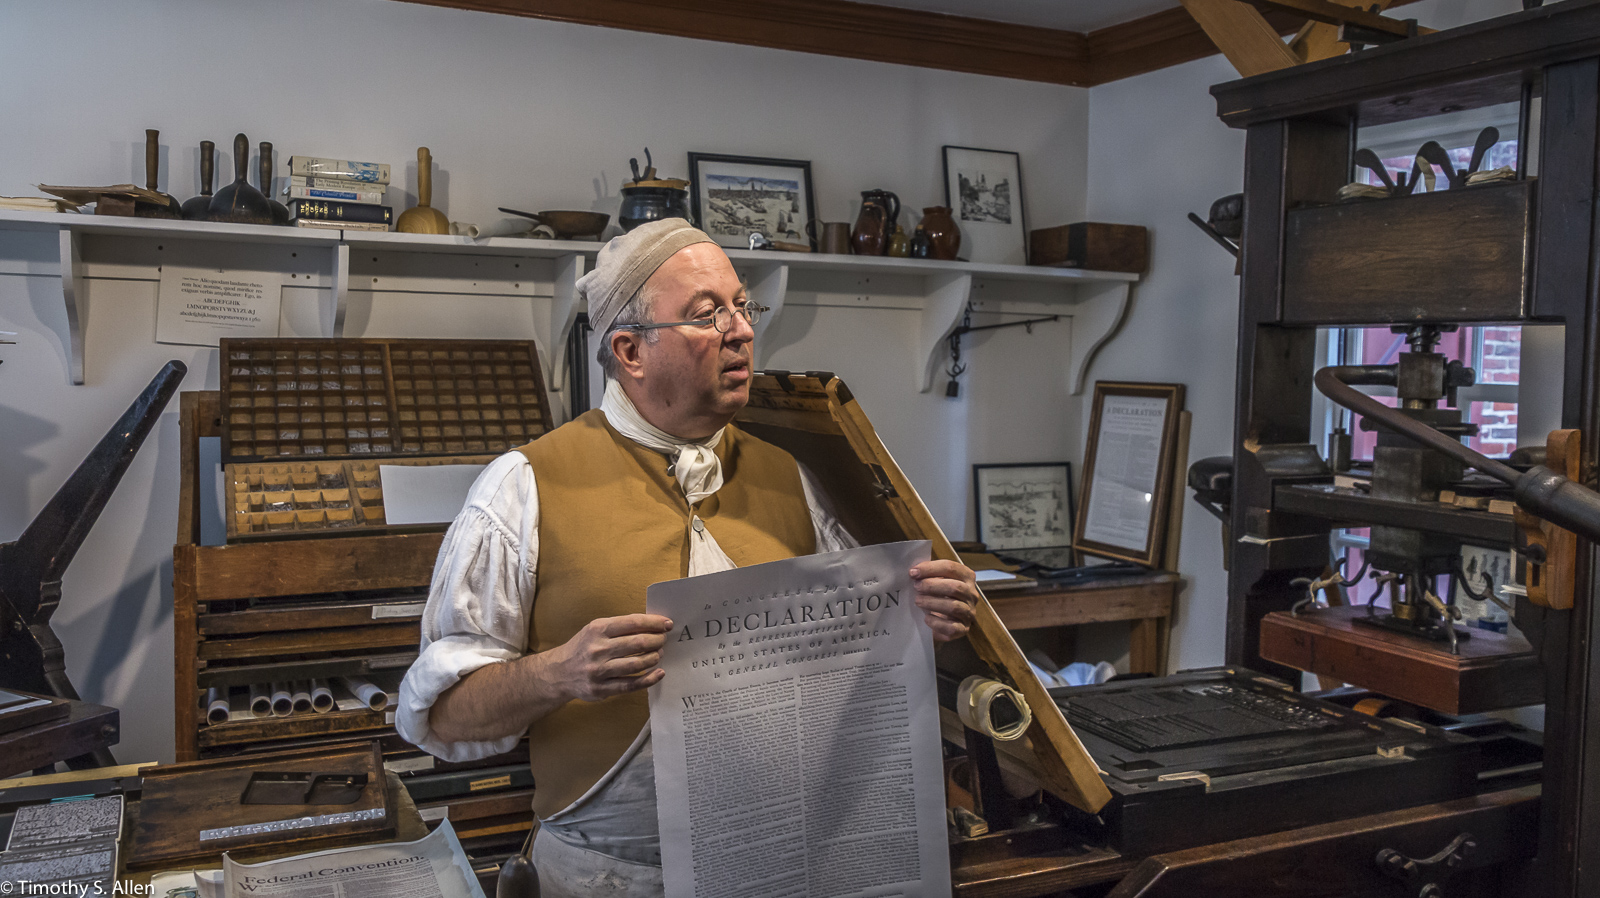 Gary Gregory, Master Printer/Executive Director The Printing Office of Edes & Gill Celebrating Constitution Day at the Old North Church Boston, MA, U.S.A. September 17, 2017 http://bostongazette.org/